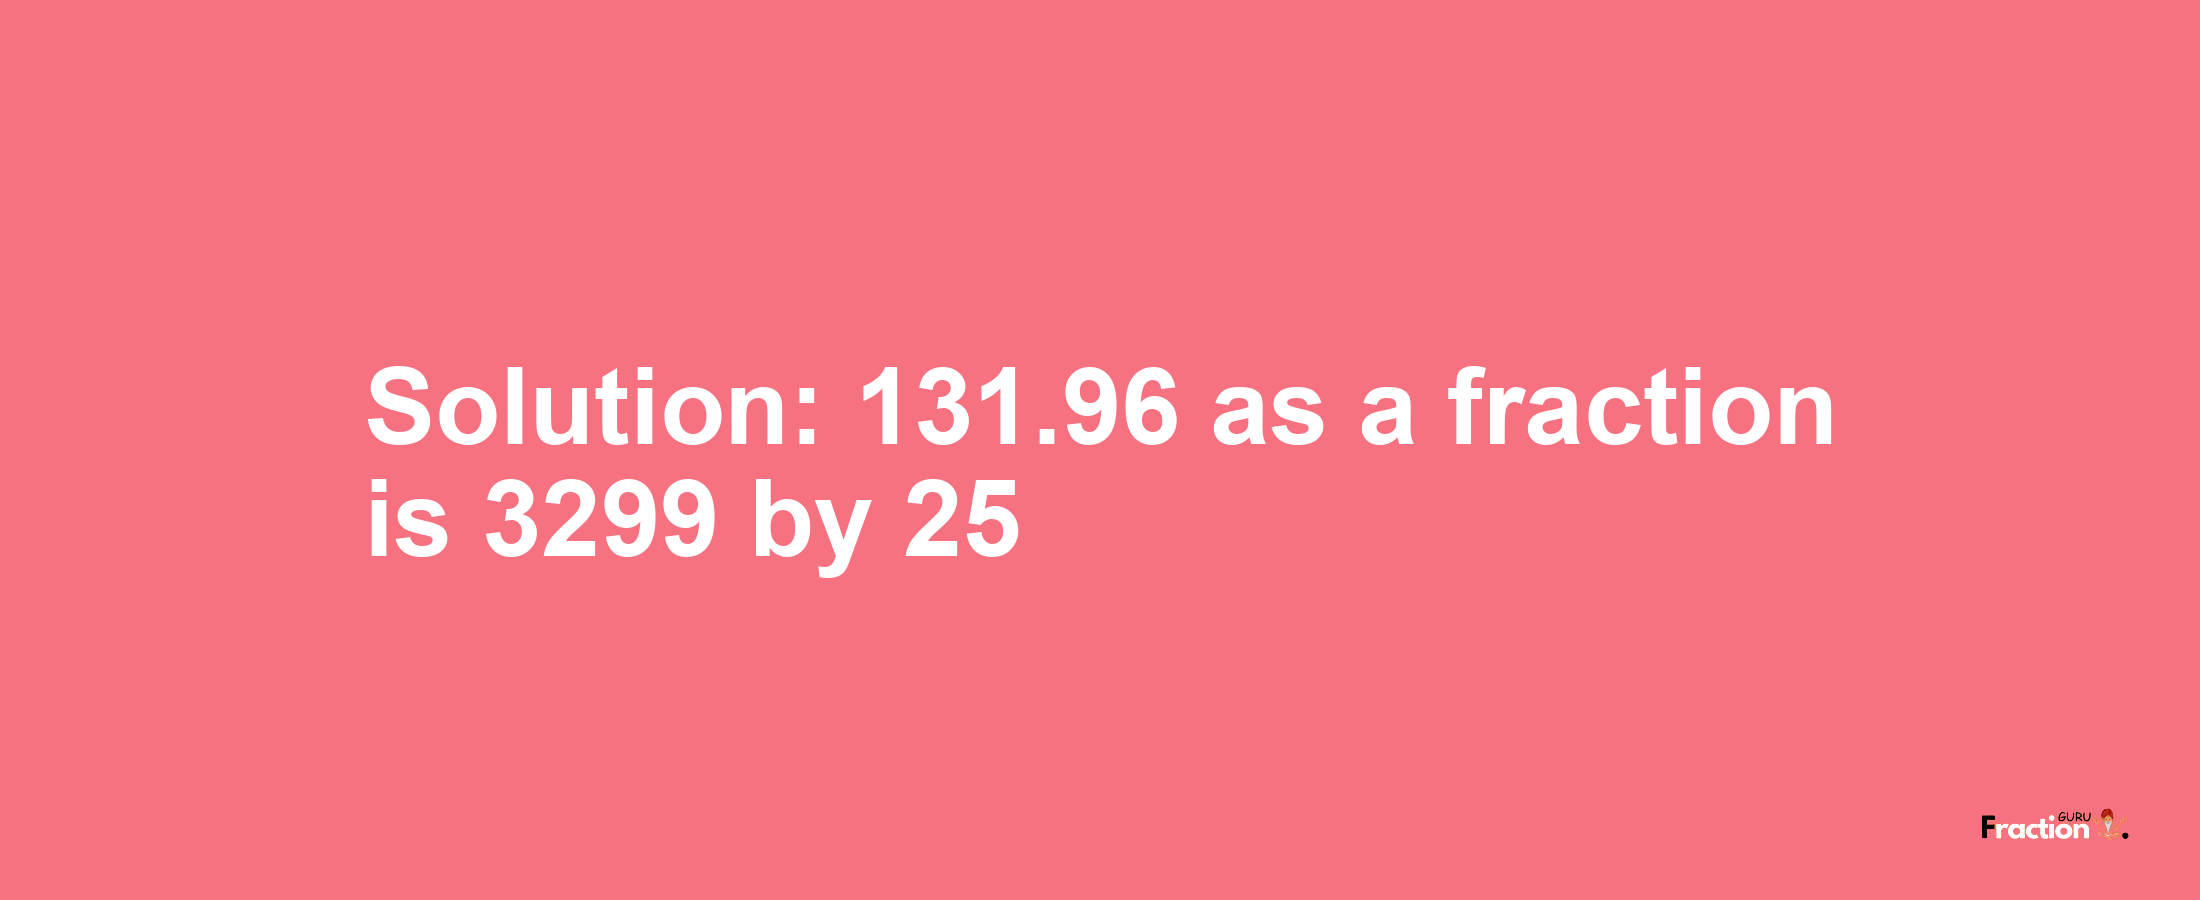 Solution:131.96 as a fraction is 3299/25